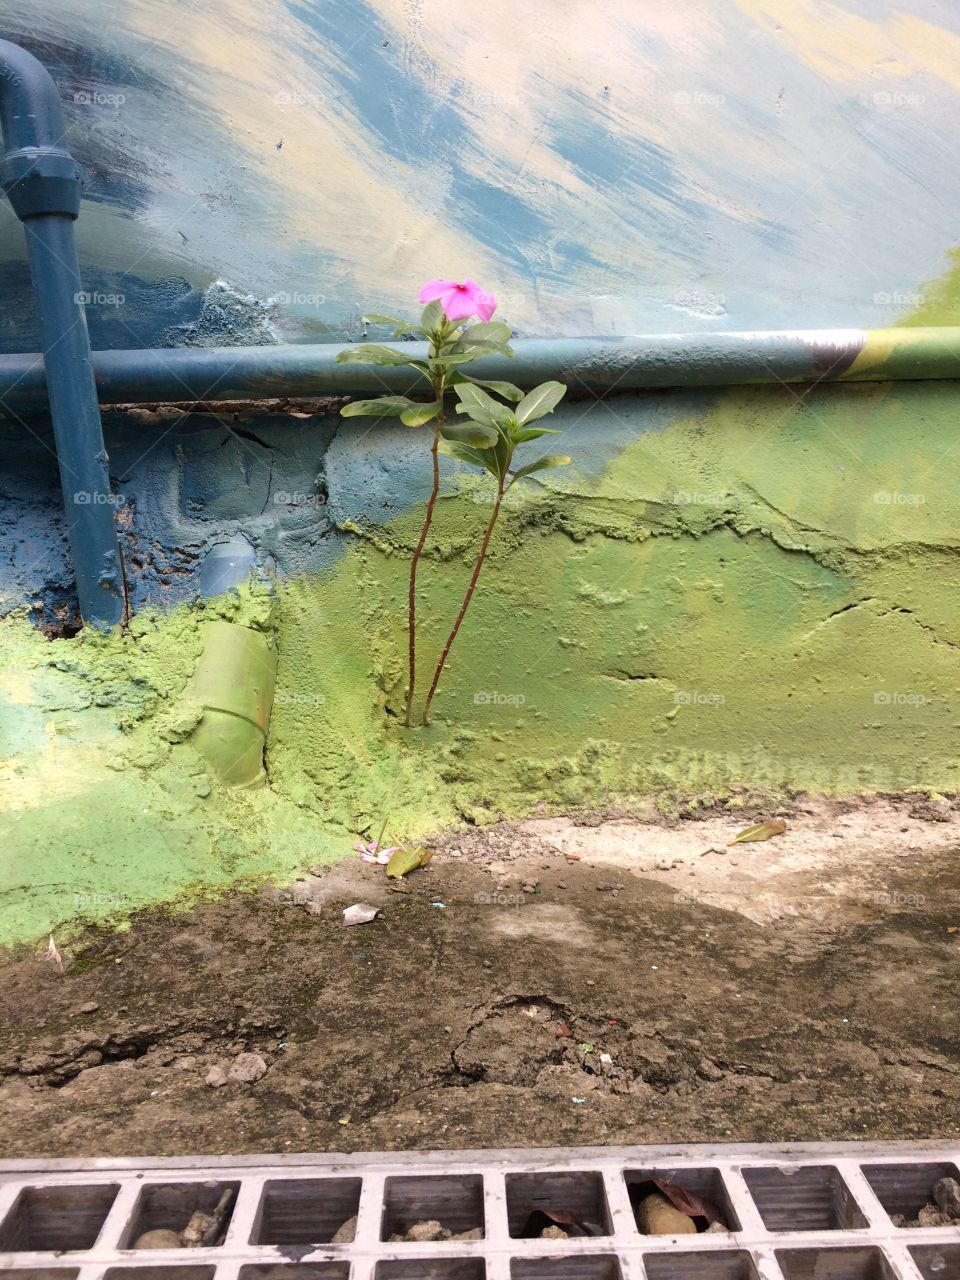 On the painted wall, a flower grows